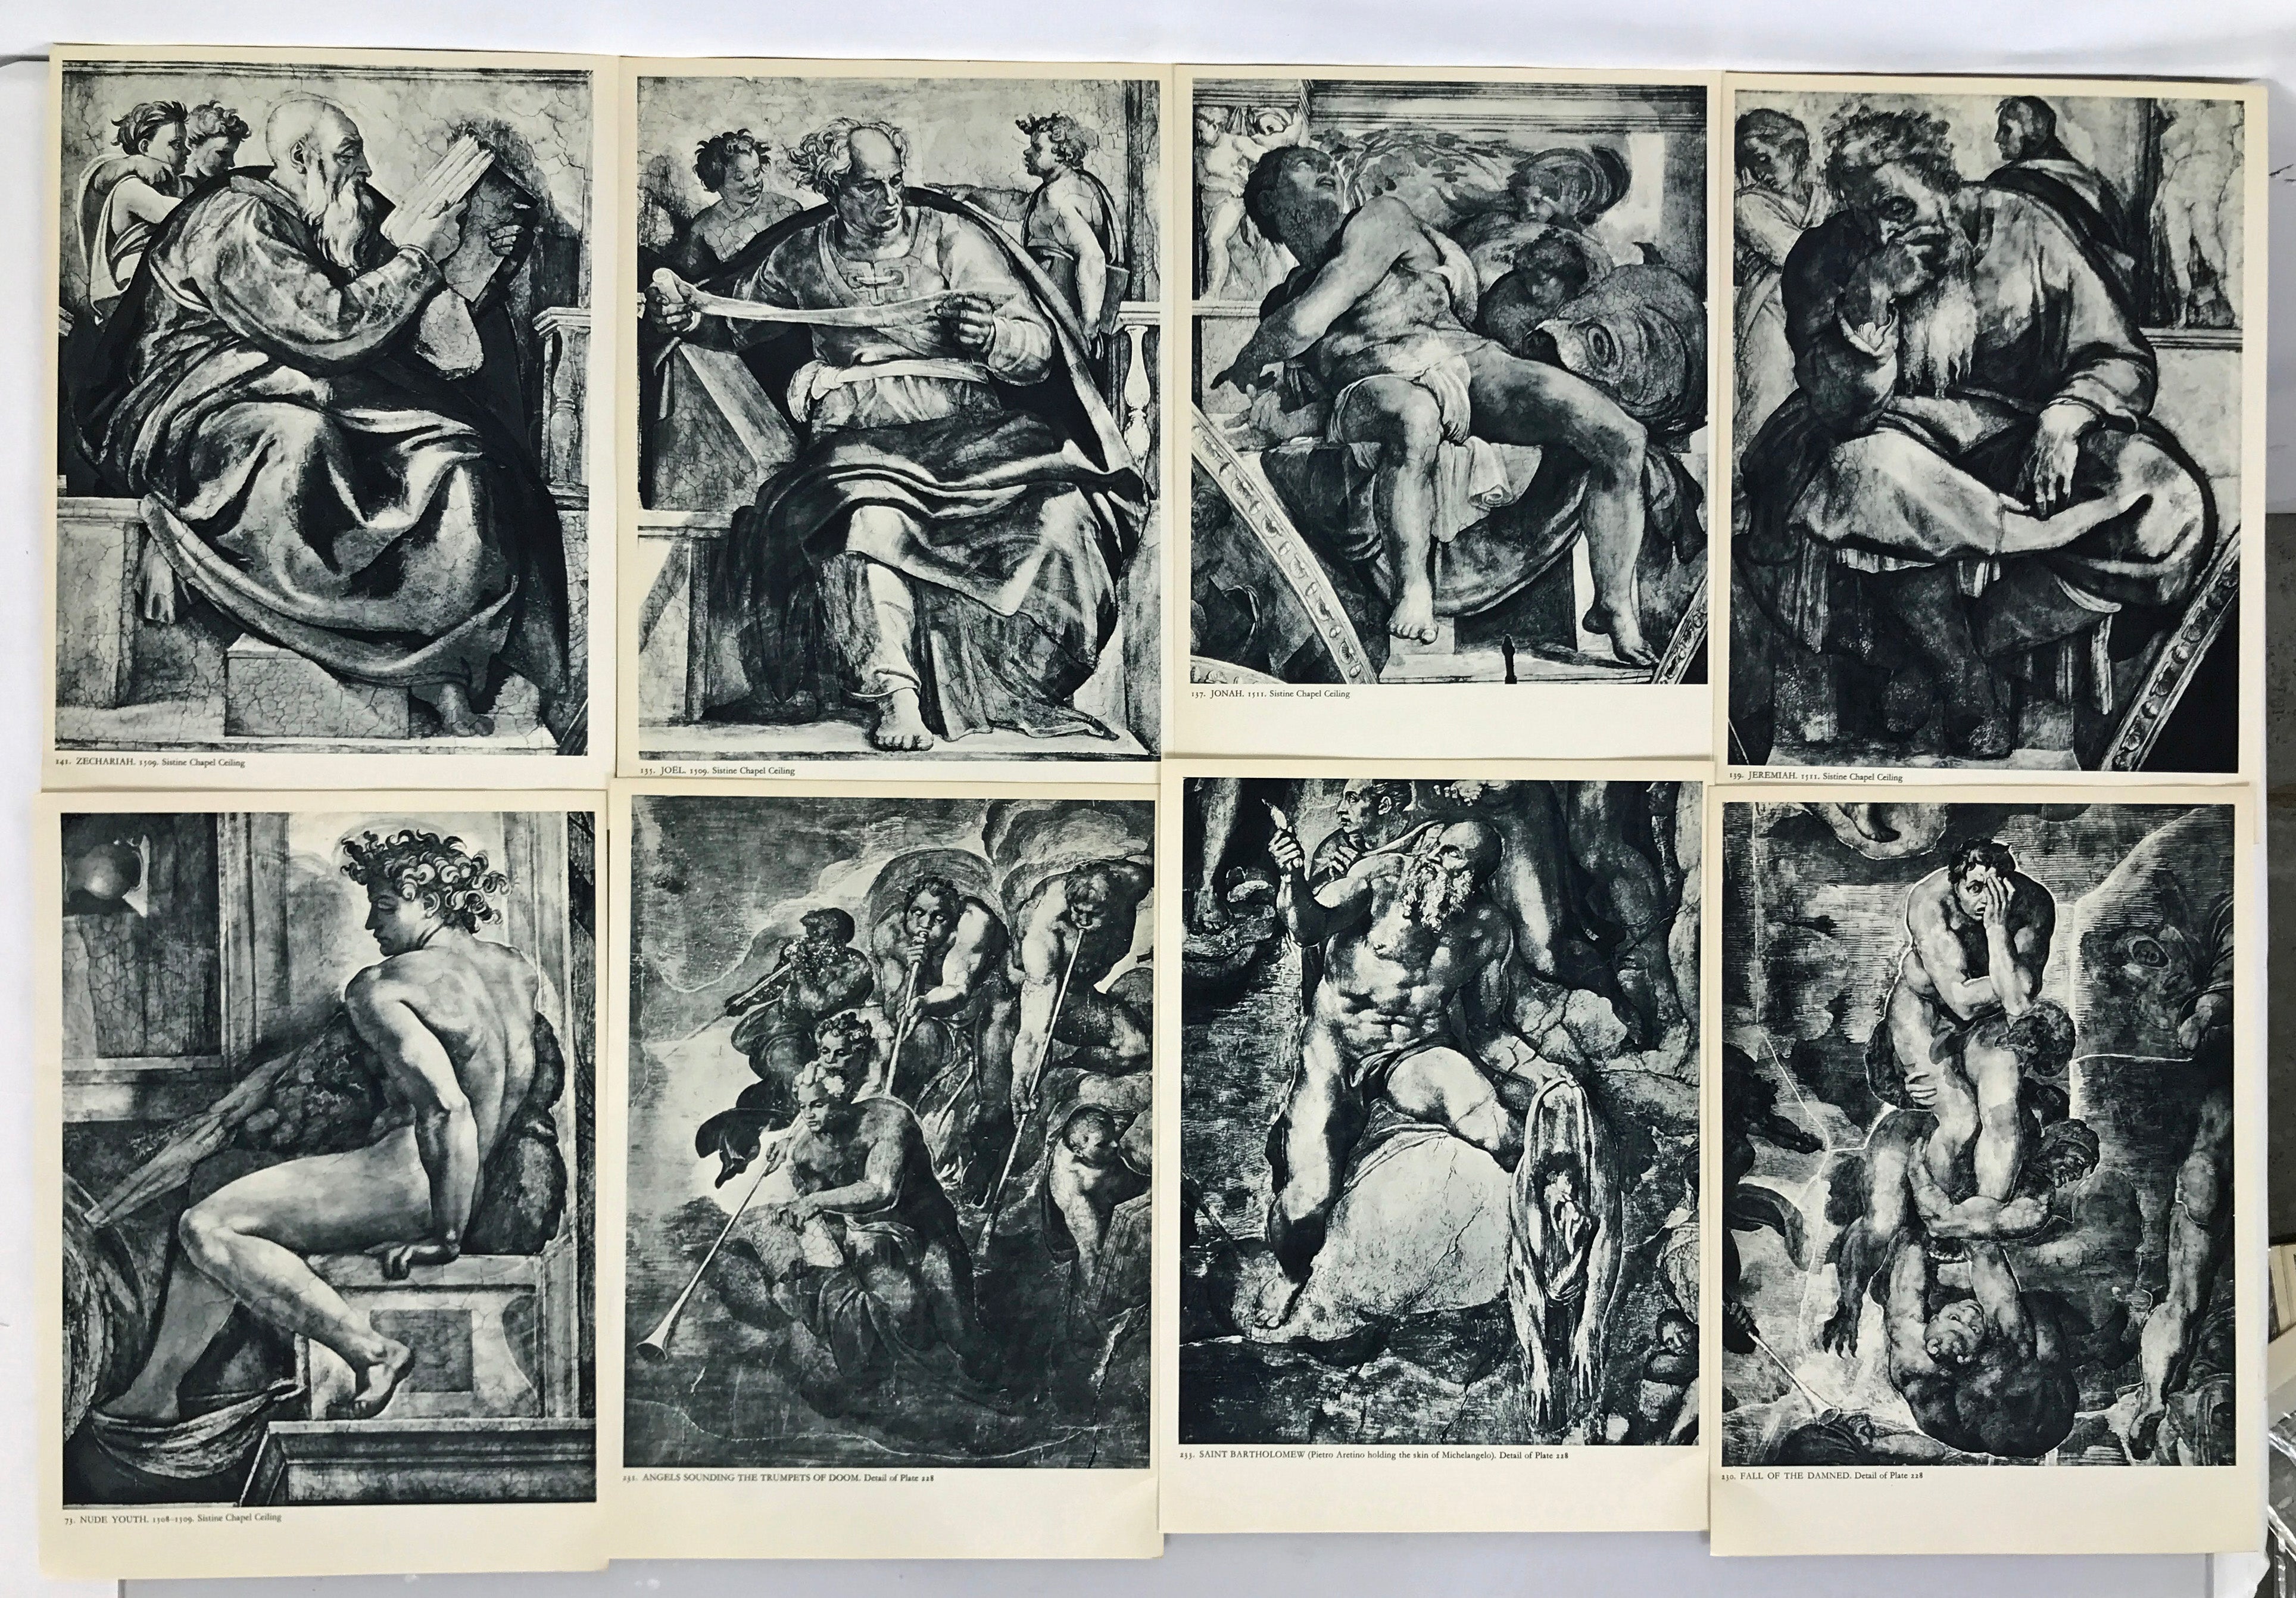 Assorted Black and White Prints of The Sistine Chapel by Michelangelo